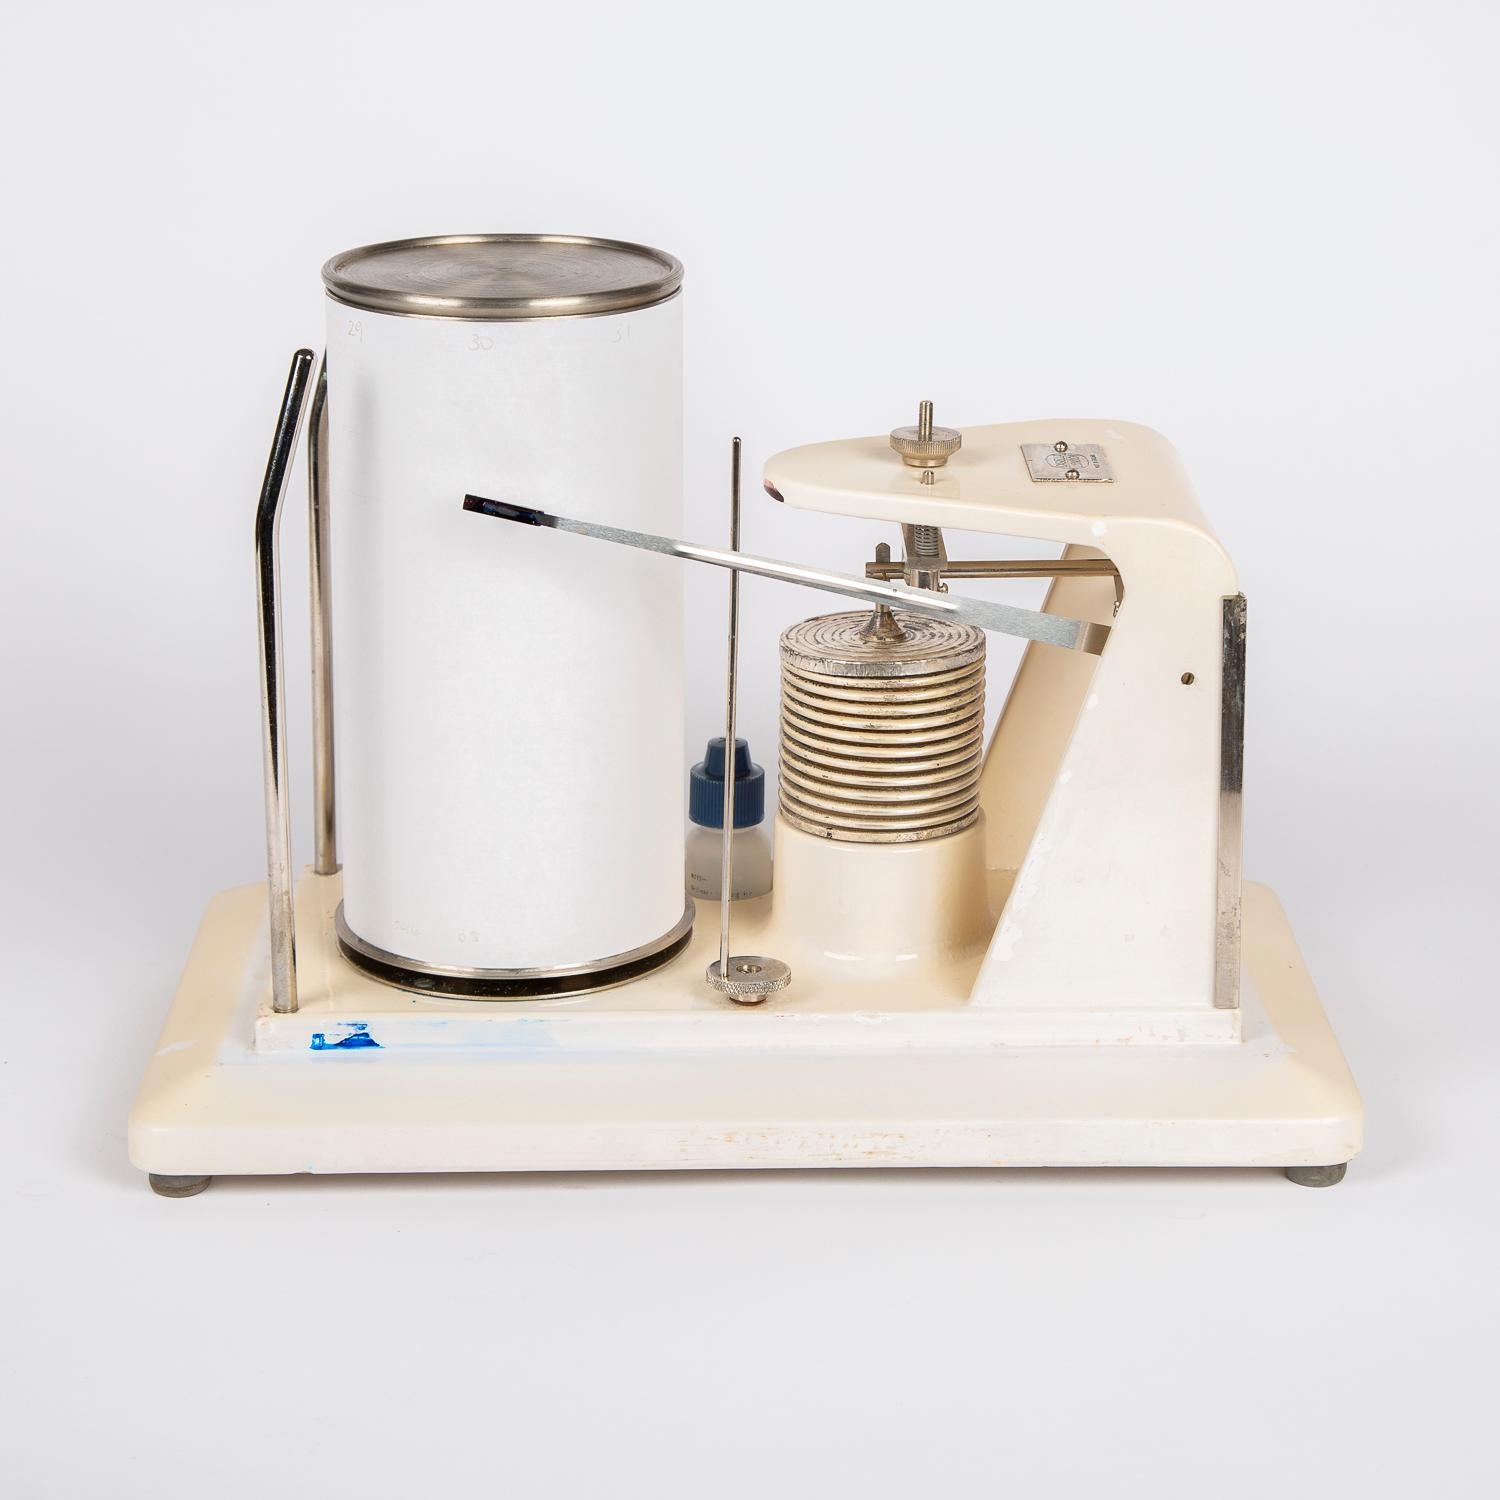 barograph is used to measure